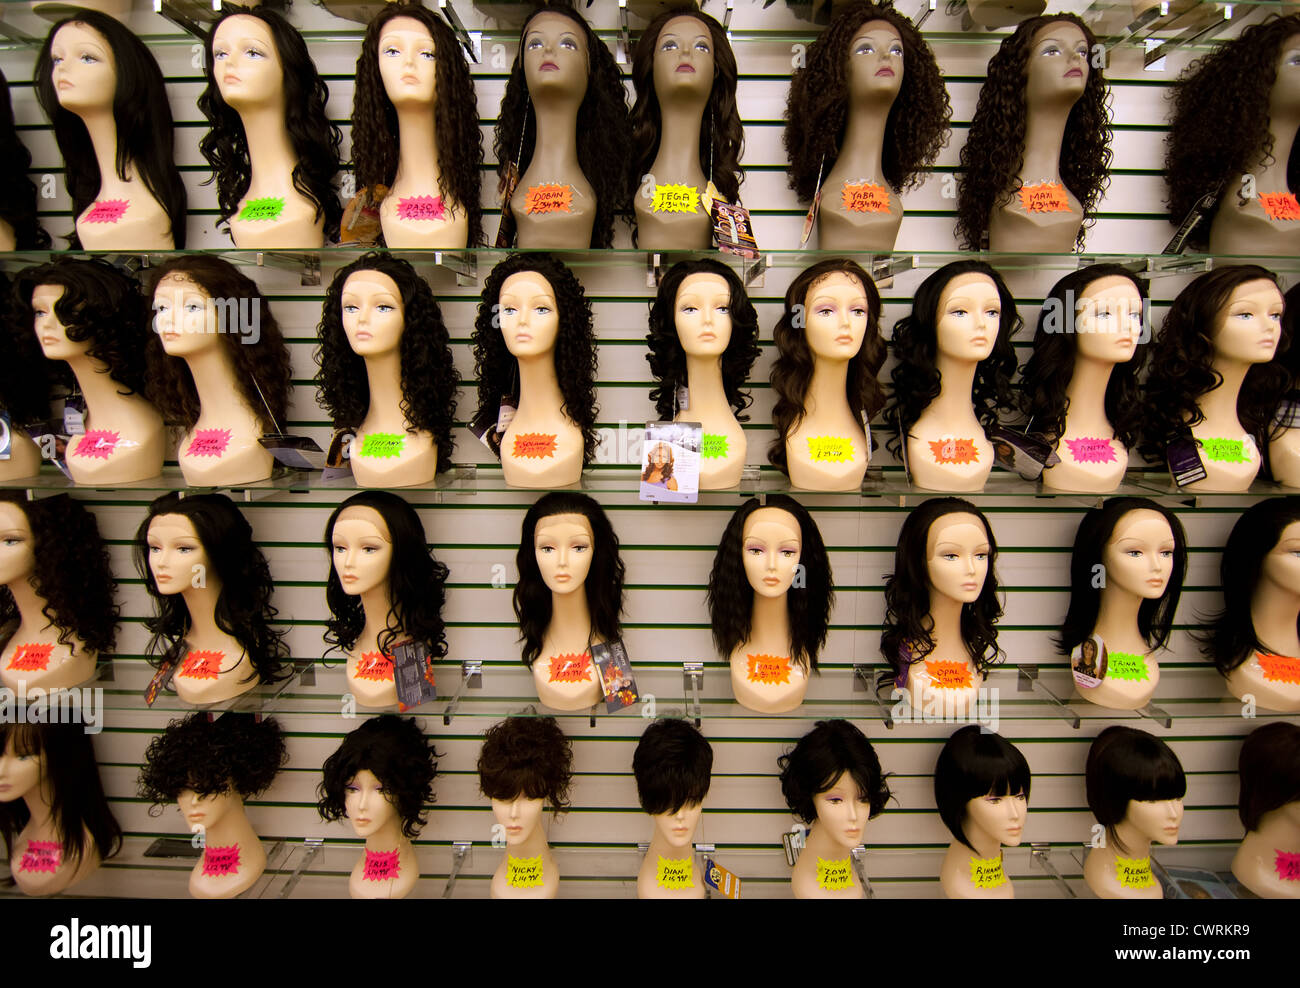 a display of wigs from a shop in queens market Upton park London e13 Stock Photo